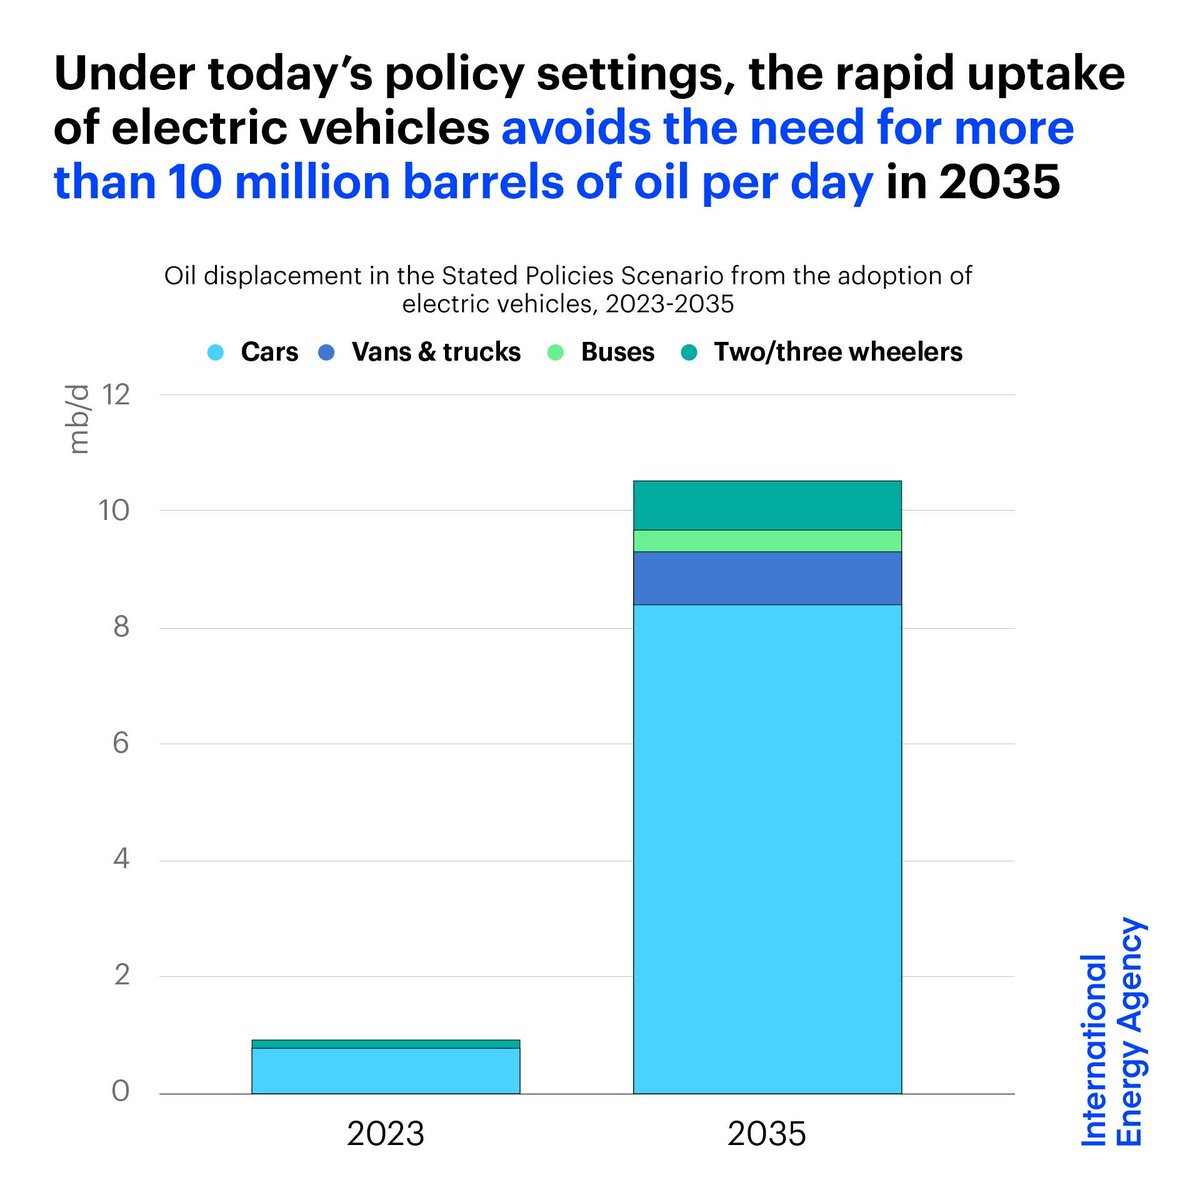 Under today’s policy settings, the uptake of EVs – including cars, vans, trucks, buses & 2/3-wheelers – is set to avoid the need for over 10 million barrels of oil a day in 2035 That's equal to all the oil demand from road transport in the US today 👉 iea.li/3vWA41s